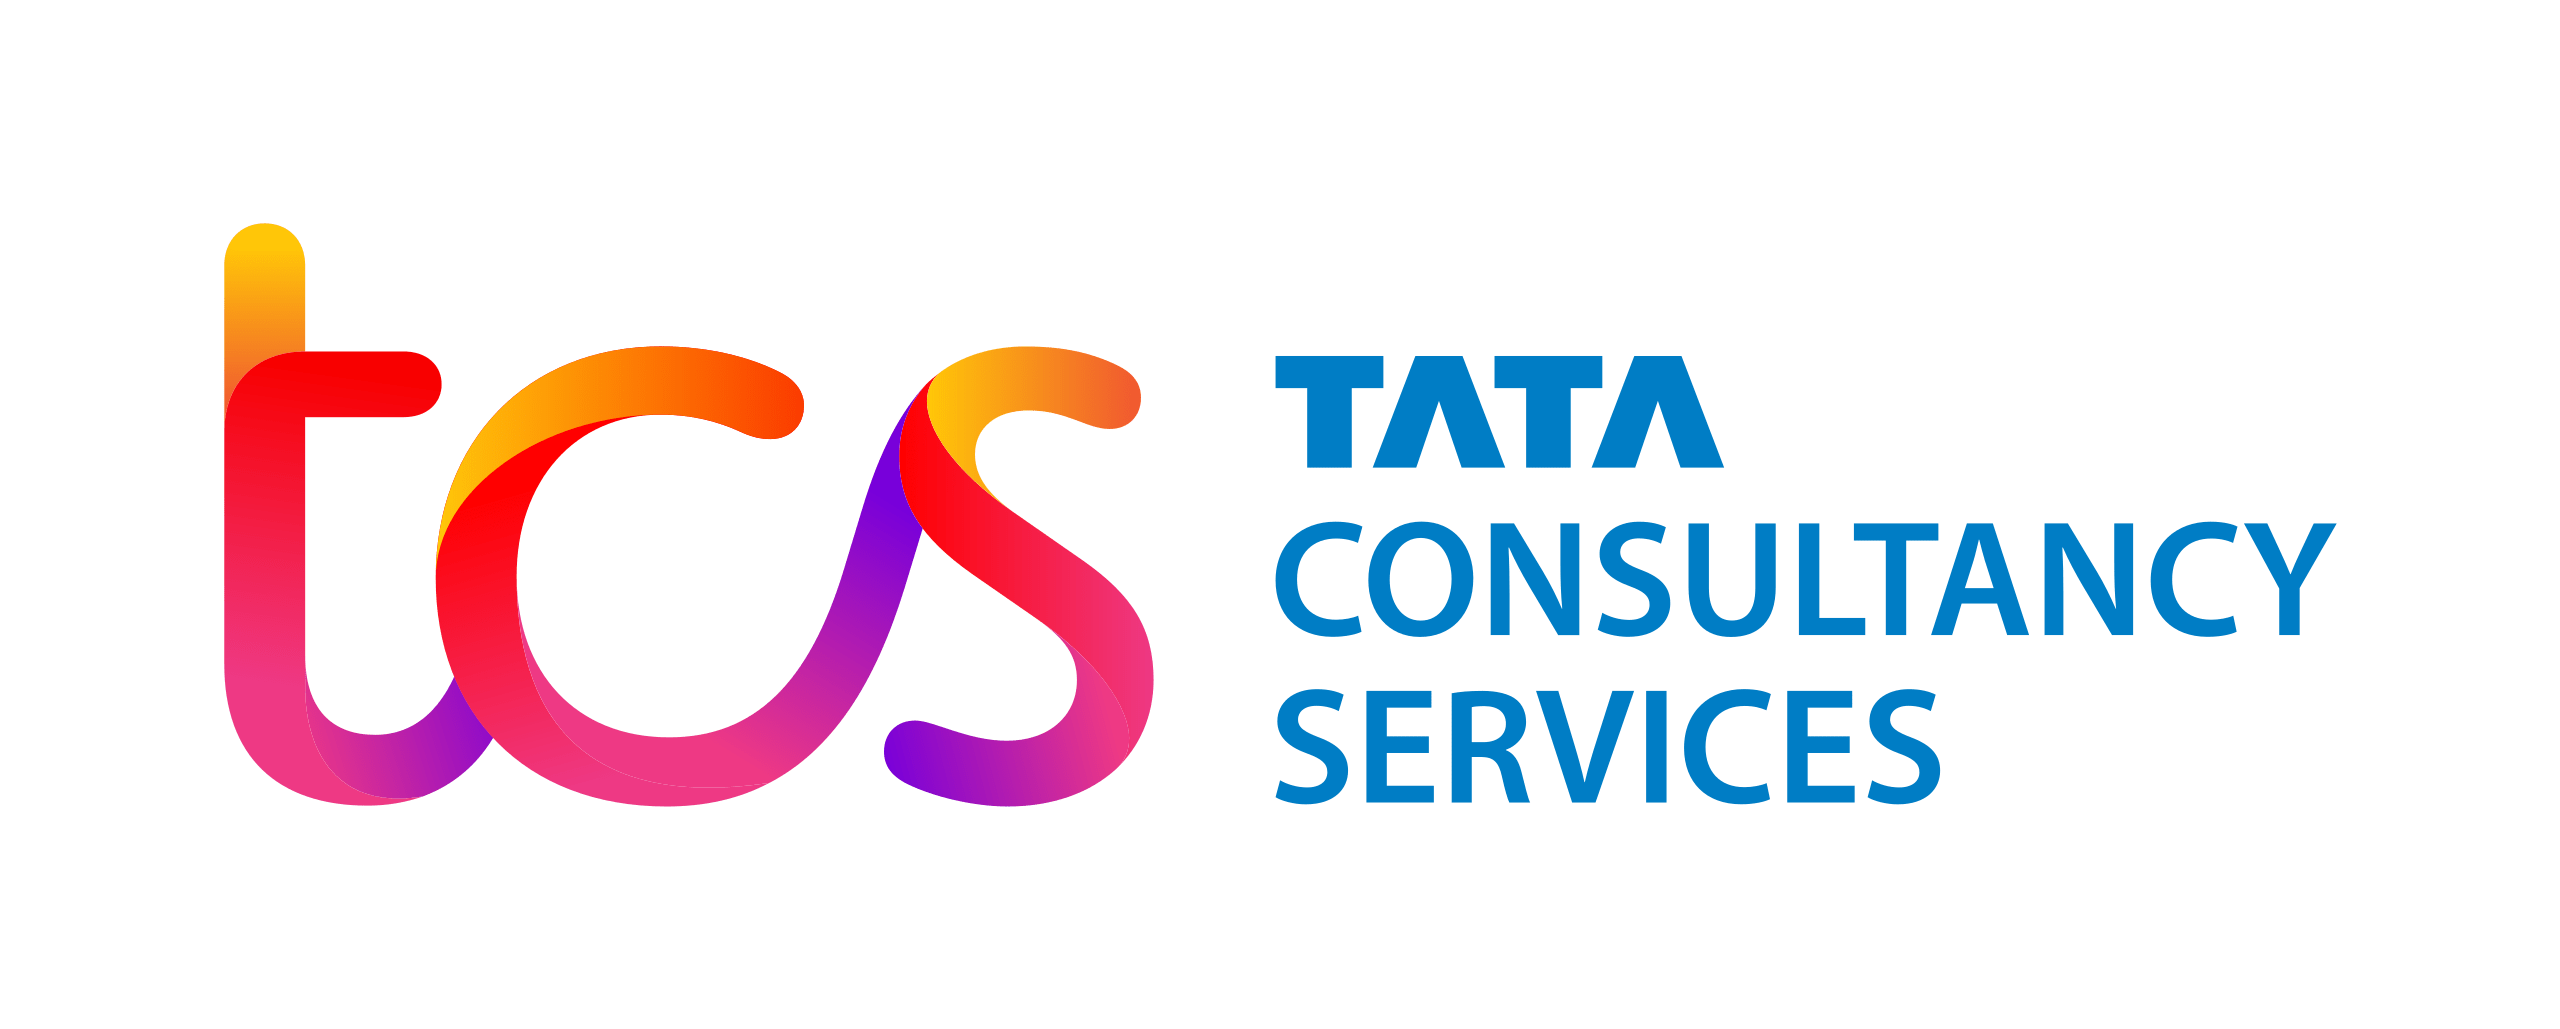 TCS has reported a 15% increase in its Q4 profit, amounting to Rs 11,392 crore, and has declared a dividend of Rs 24 per share